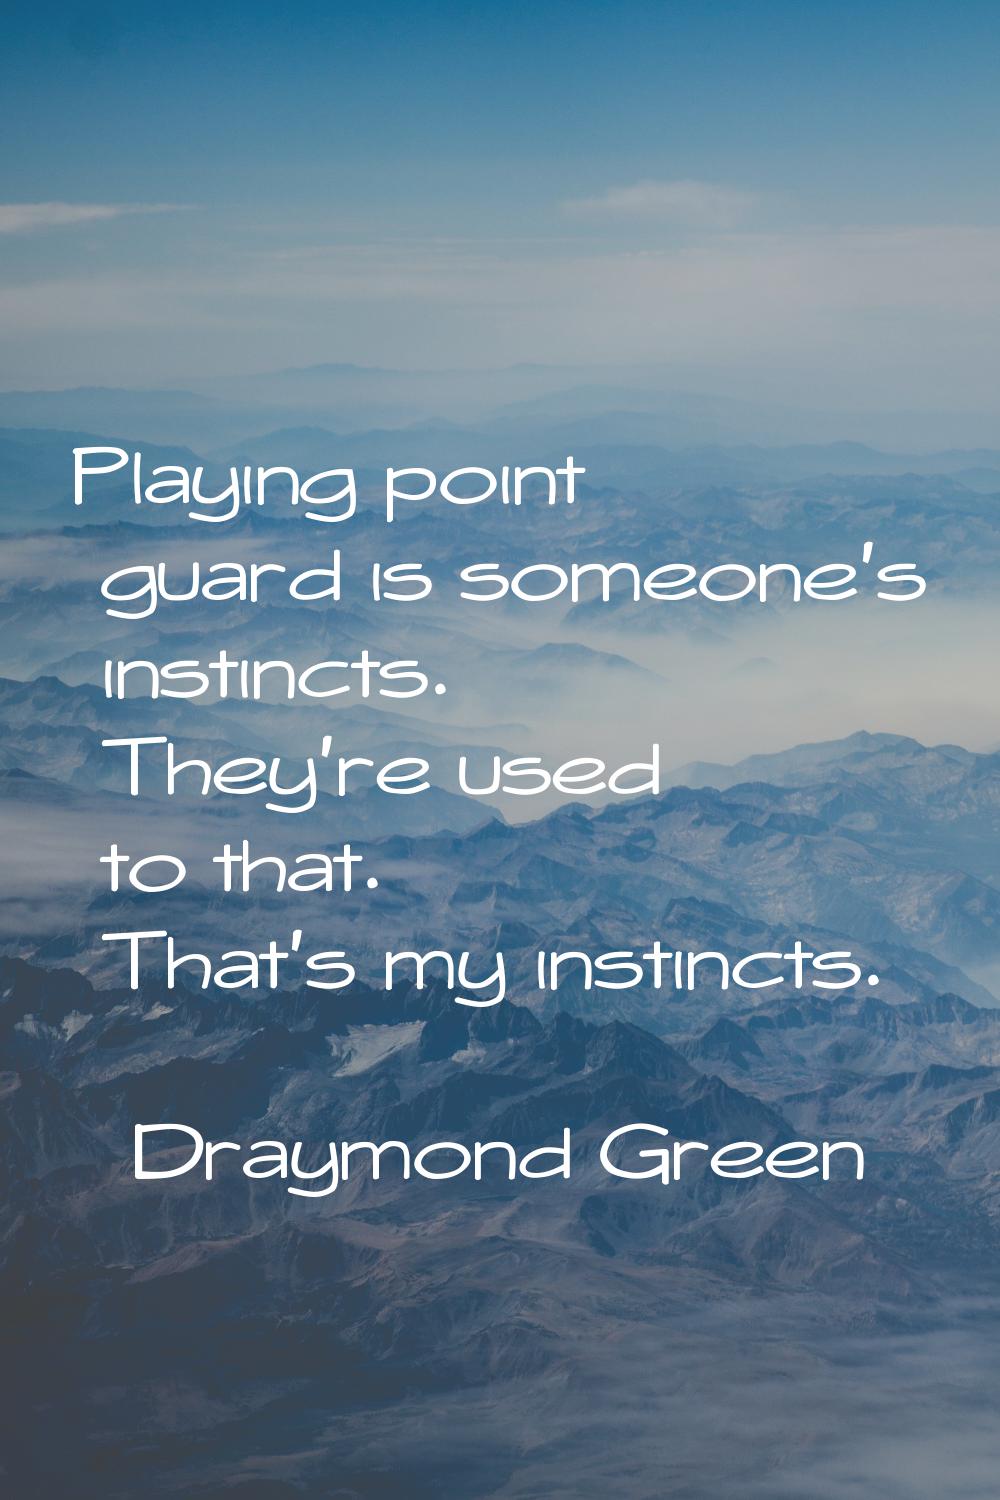 Playing point guard is someone's instincts. They're used to that. That's my instincts.